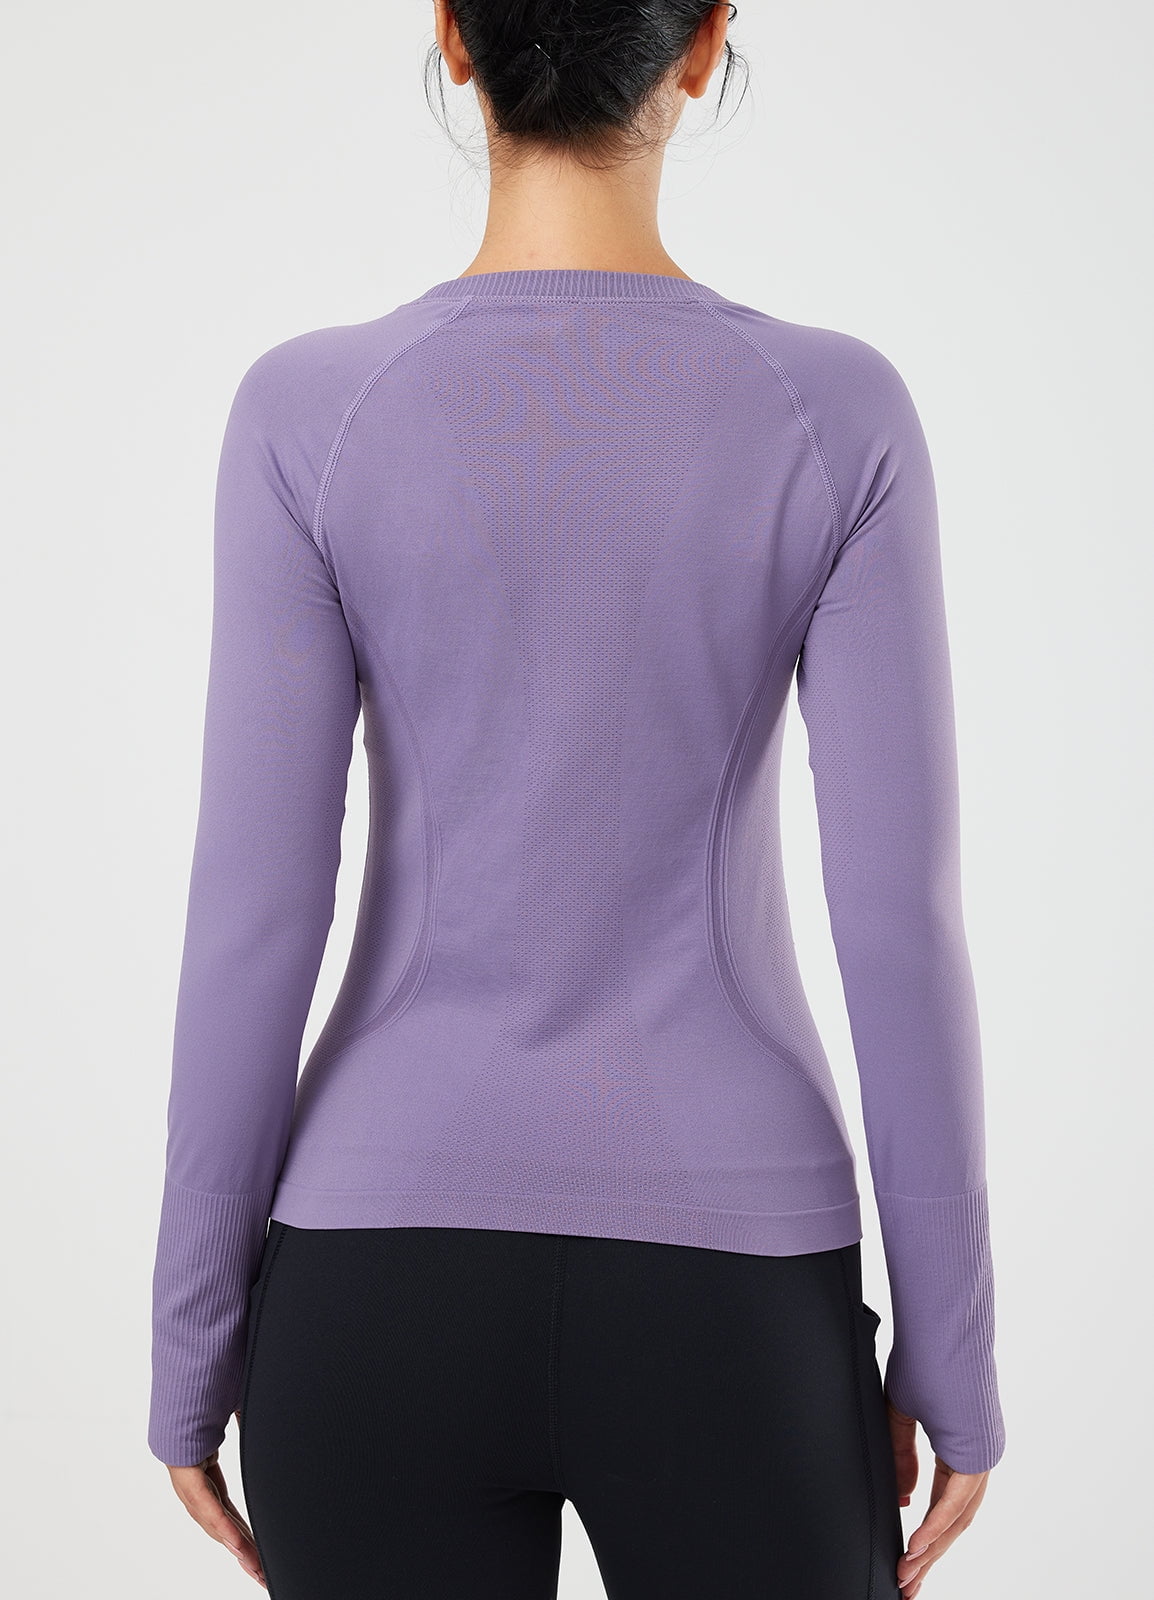 BALEAF Long Sleeve Sweat Shirts For Women Seamless Tight with Thumb Holes  Running Purple M